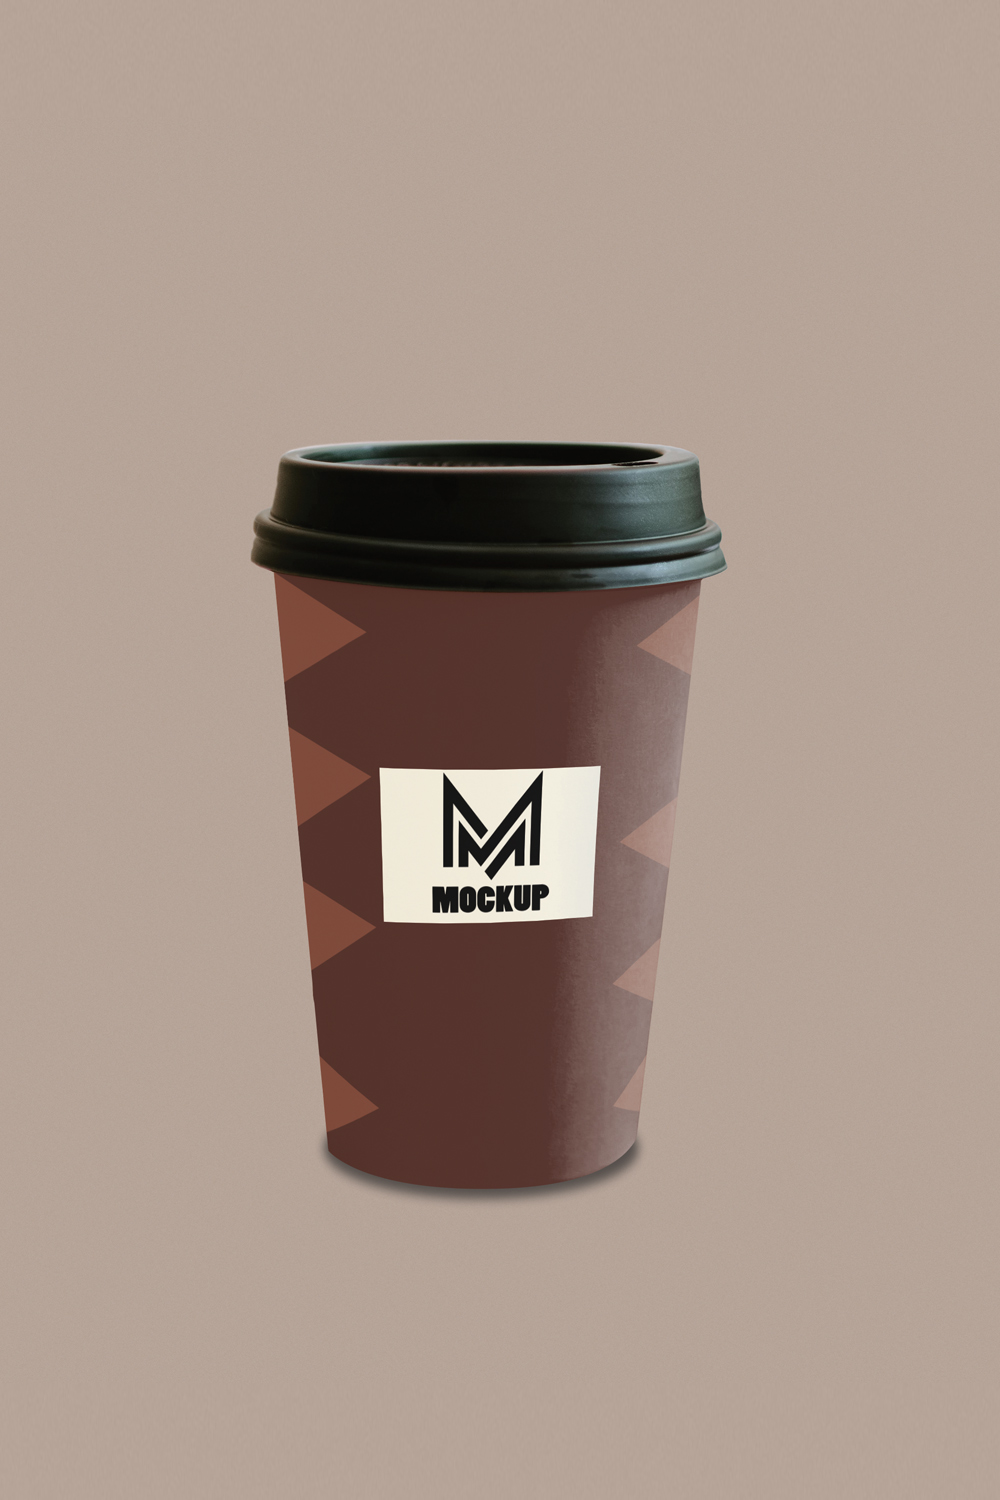 Coffee Cup Mockup pinterest preview image.